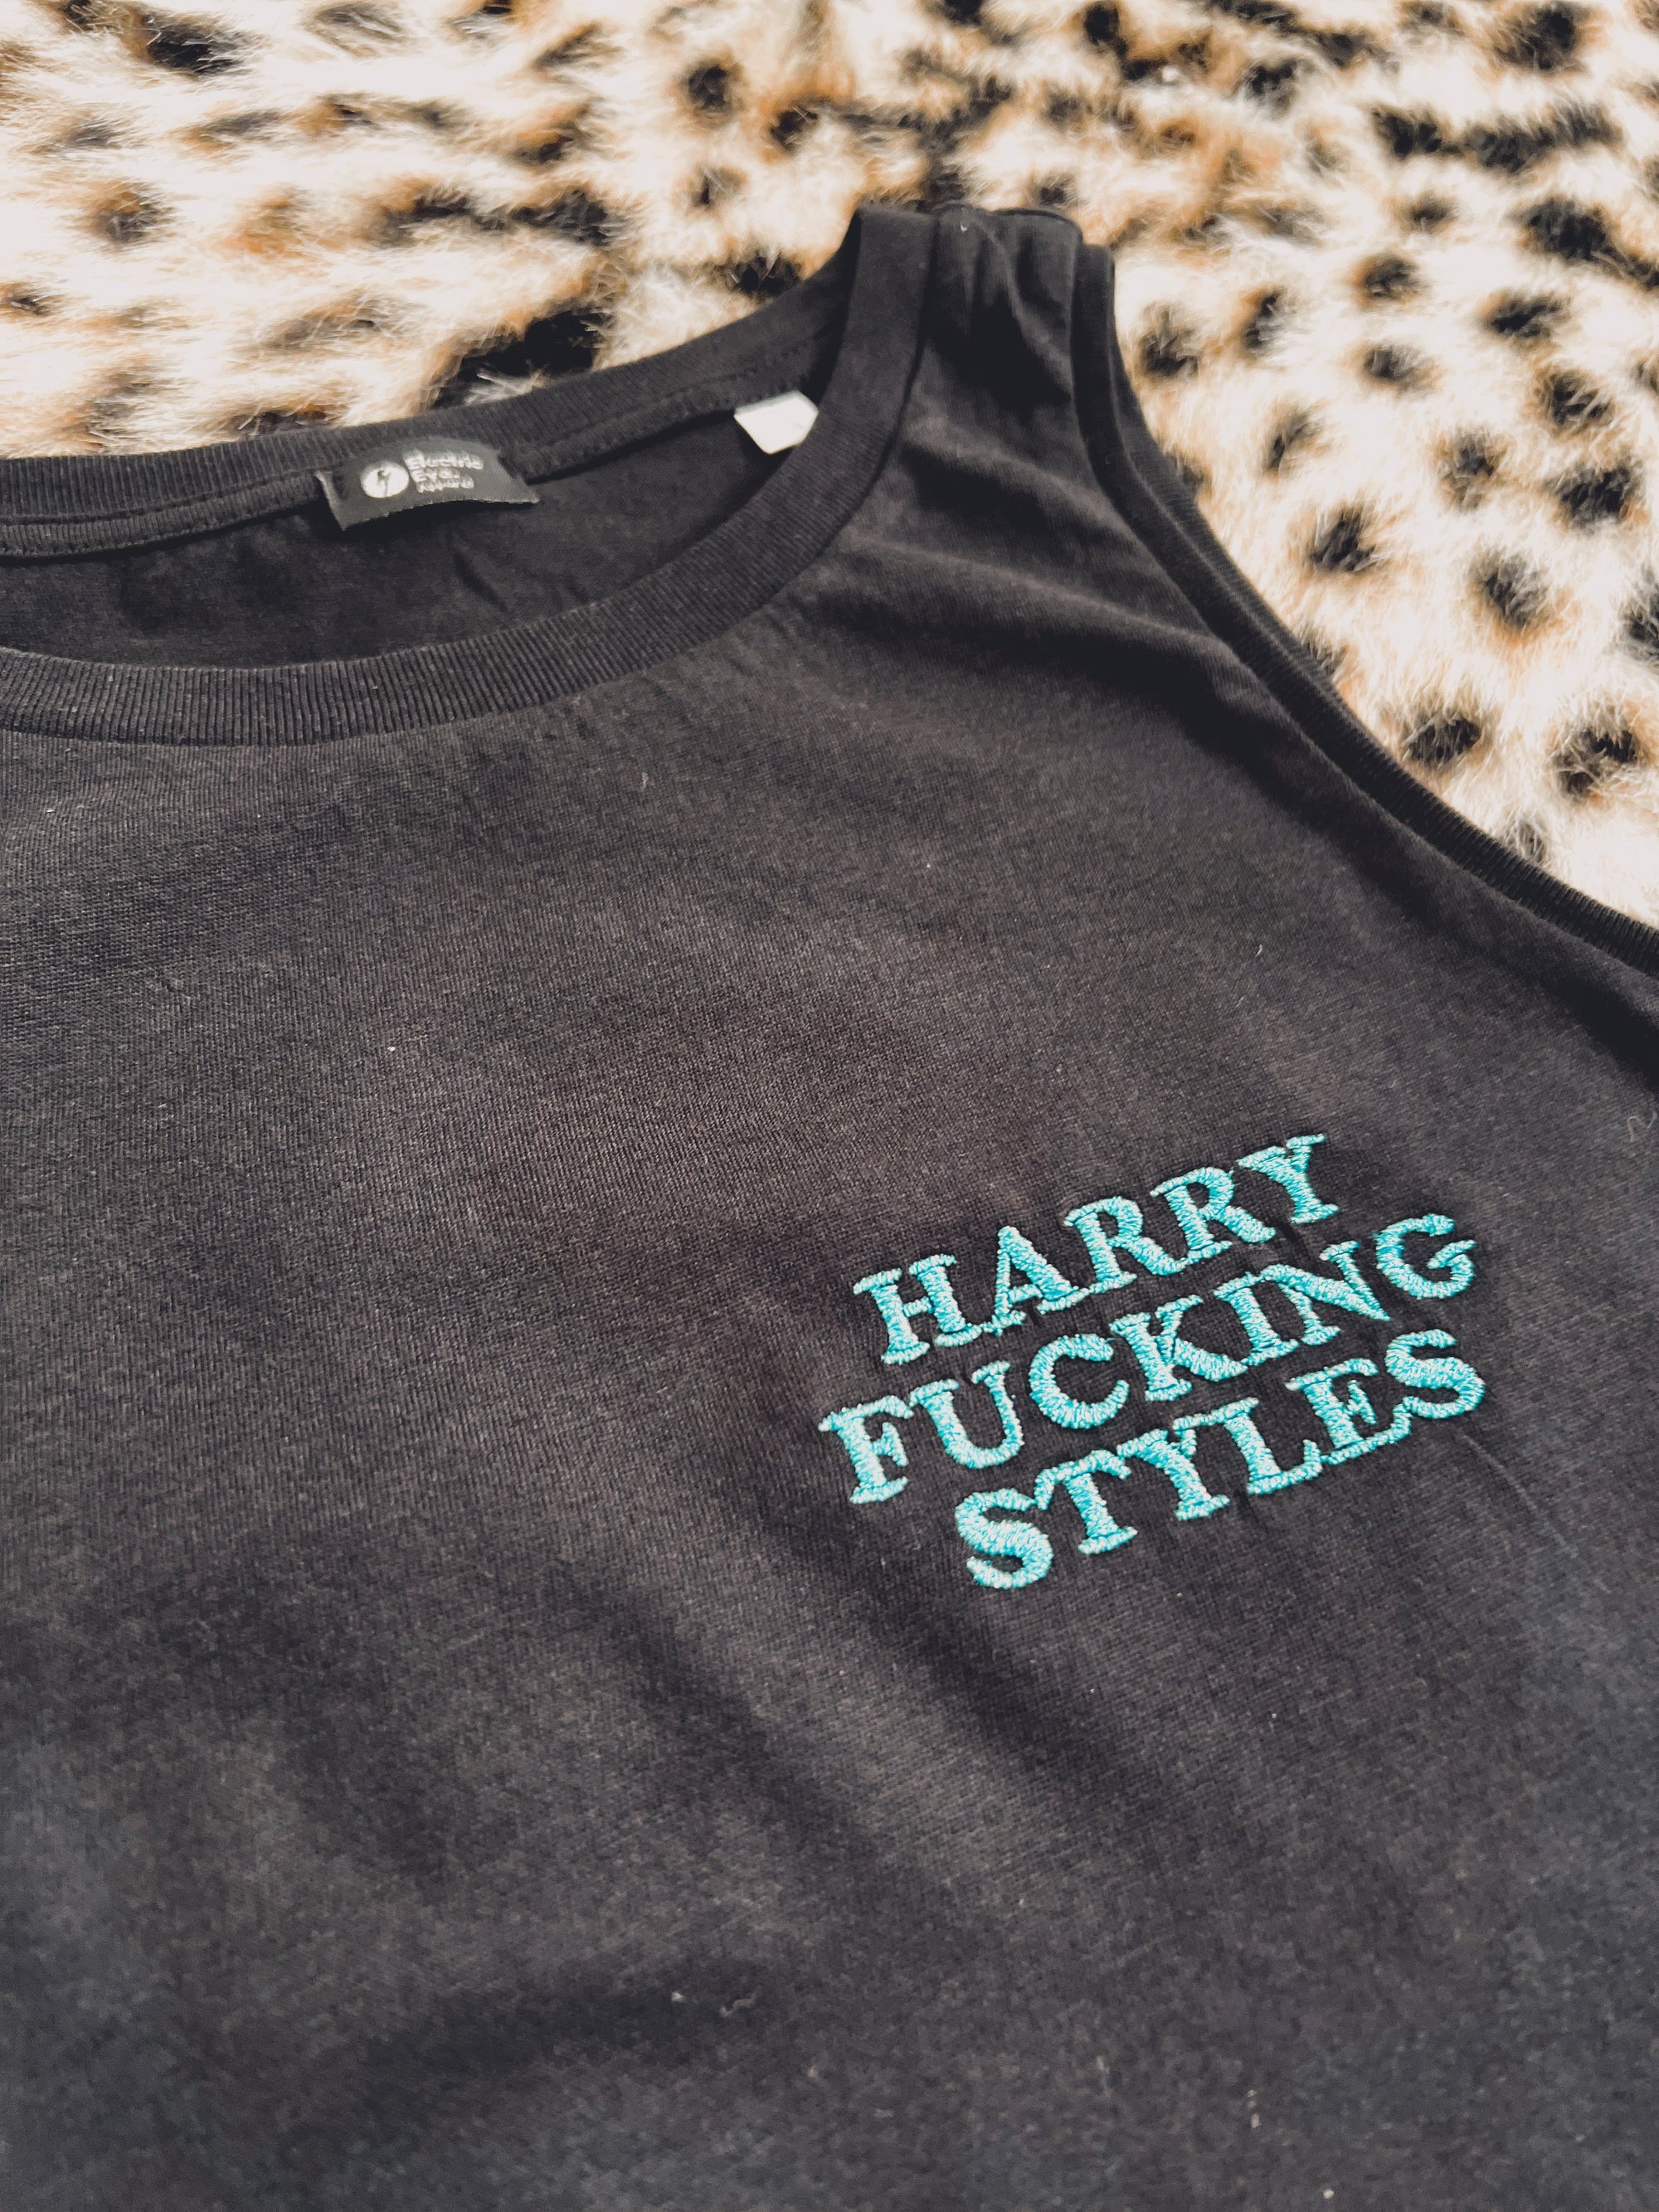 SAMPLE SALE ‘HARRY F*CKING STYLES’ LEFT CHEST EMBROIDERED WOMEN'S CROPPED ORGANIC COTTON 'DANCER' TANK TOP (SIZE XS)